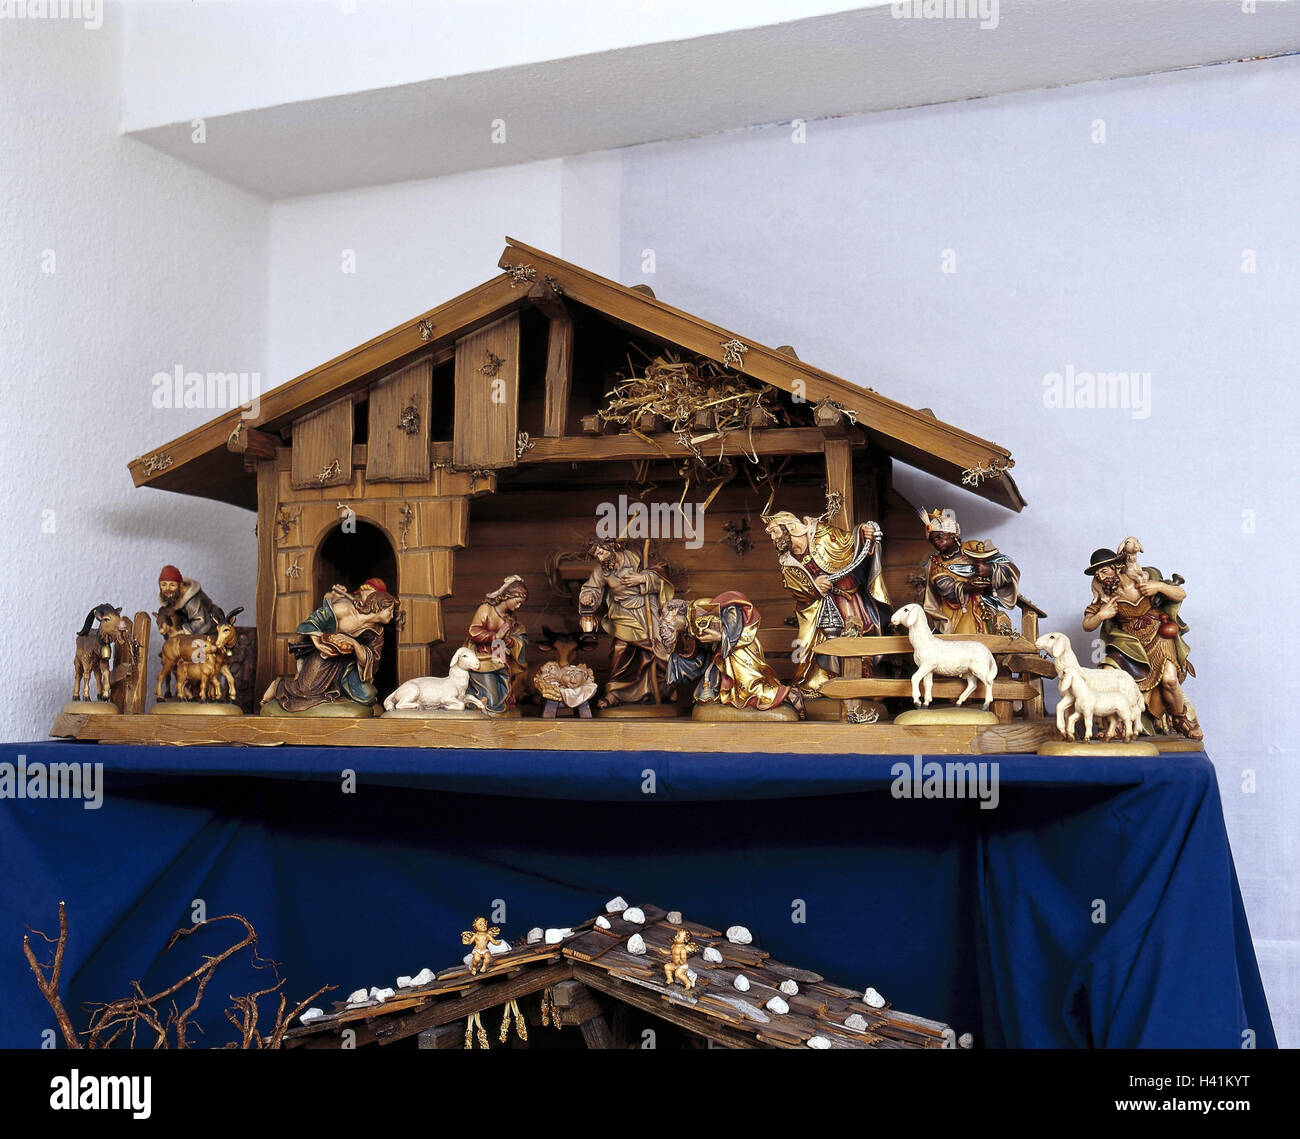 Creche Germany, Oberammergau, Christmas, manger, traditions, religion, holy family, Jesus's child, nativity figurines, wooden figures, figures, wooden, product photography, Still life Stock Photo